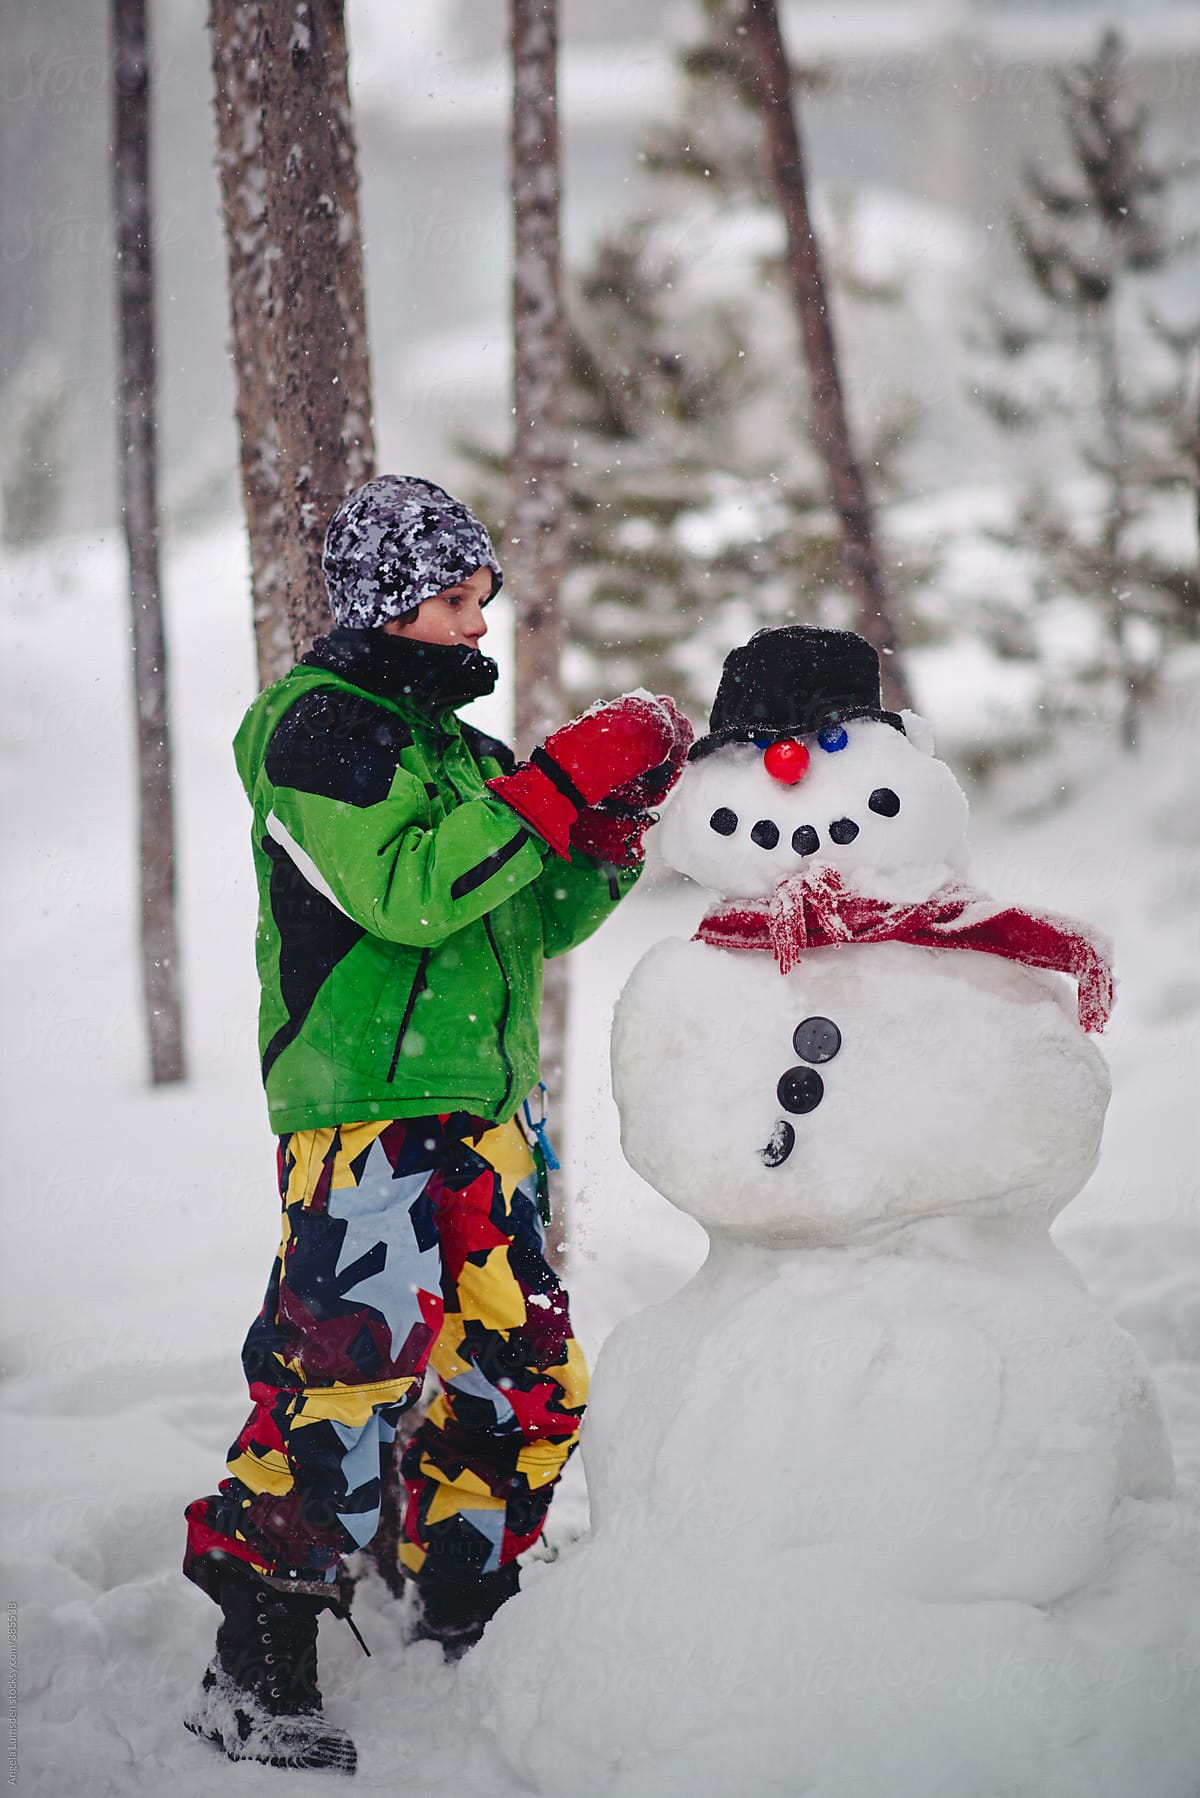 Boy putting finishing touches on a snowman on a snowy day